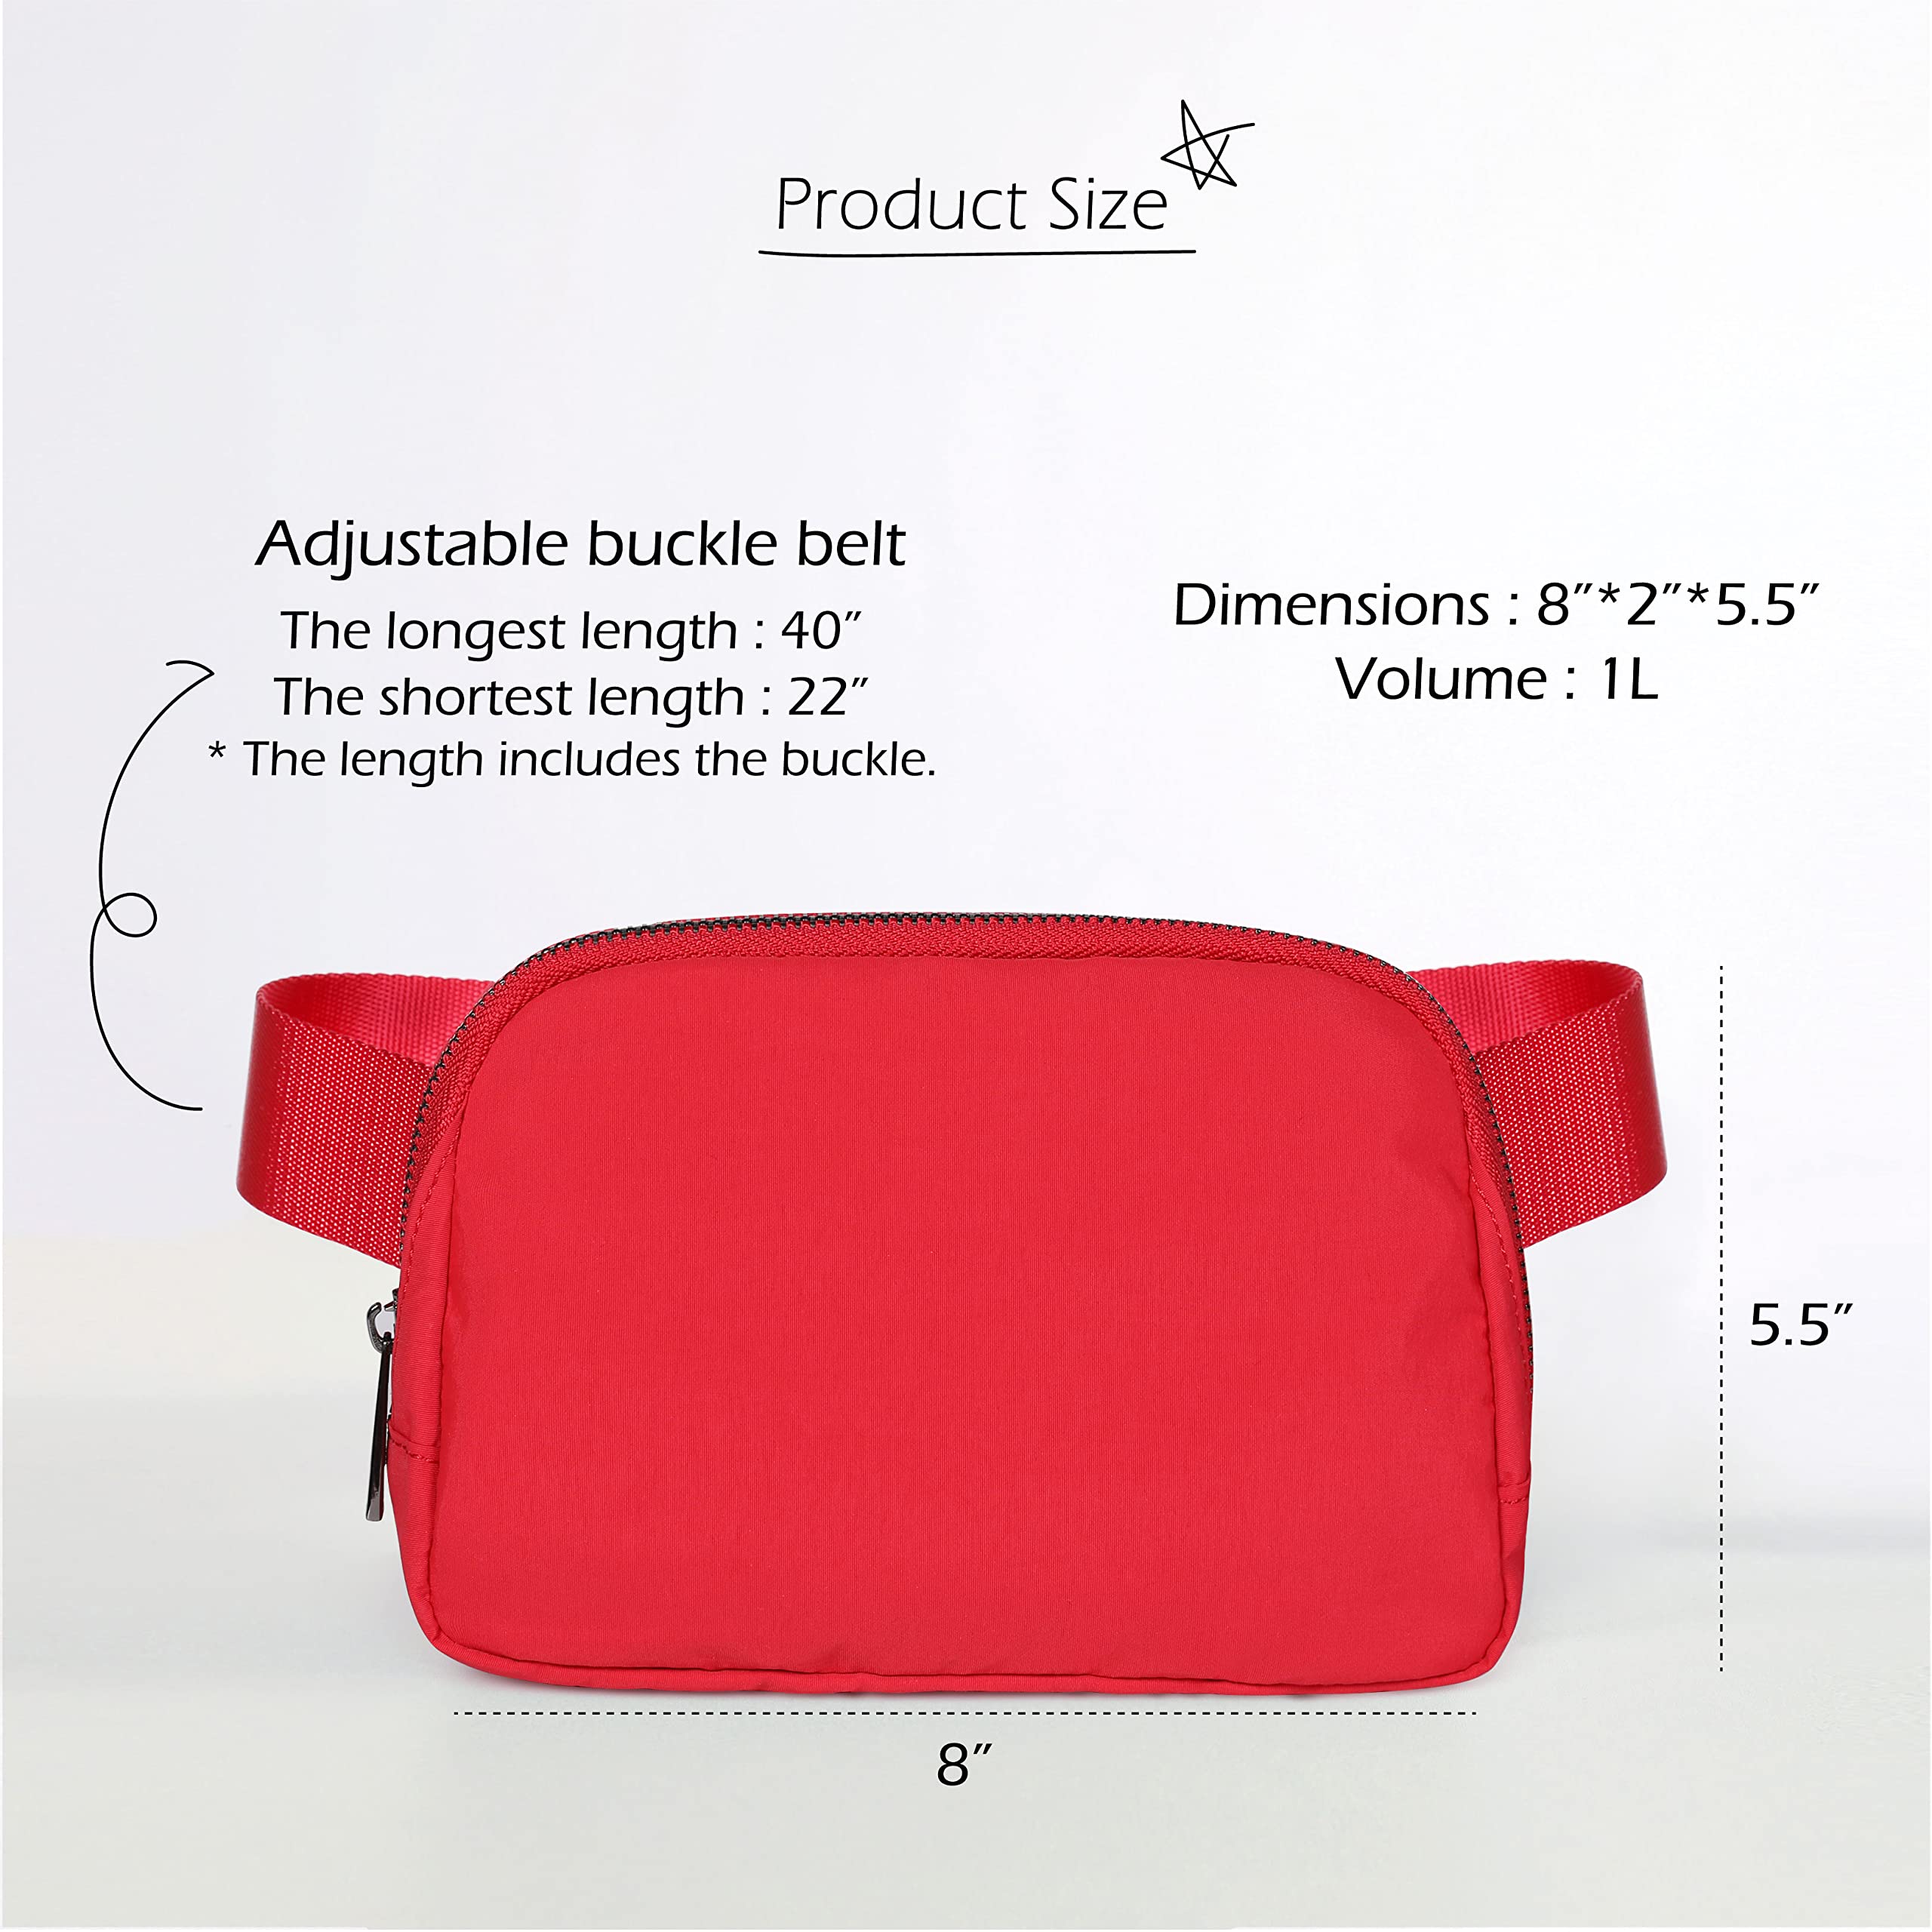 ODODOS Unisex Mini Belt Bag with Adjustable Strap Small Waist Pouch for Workout Running Traveling Hiking, Red